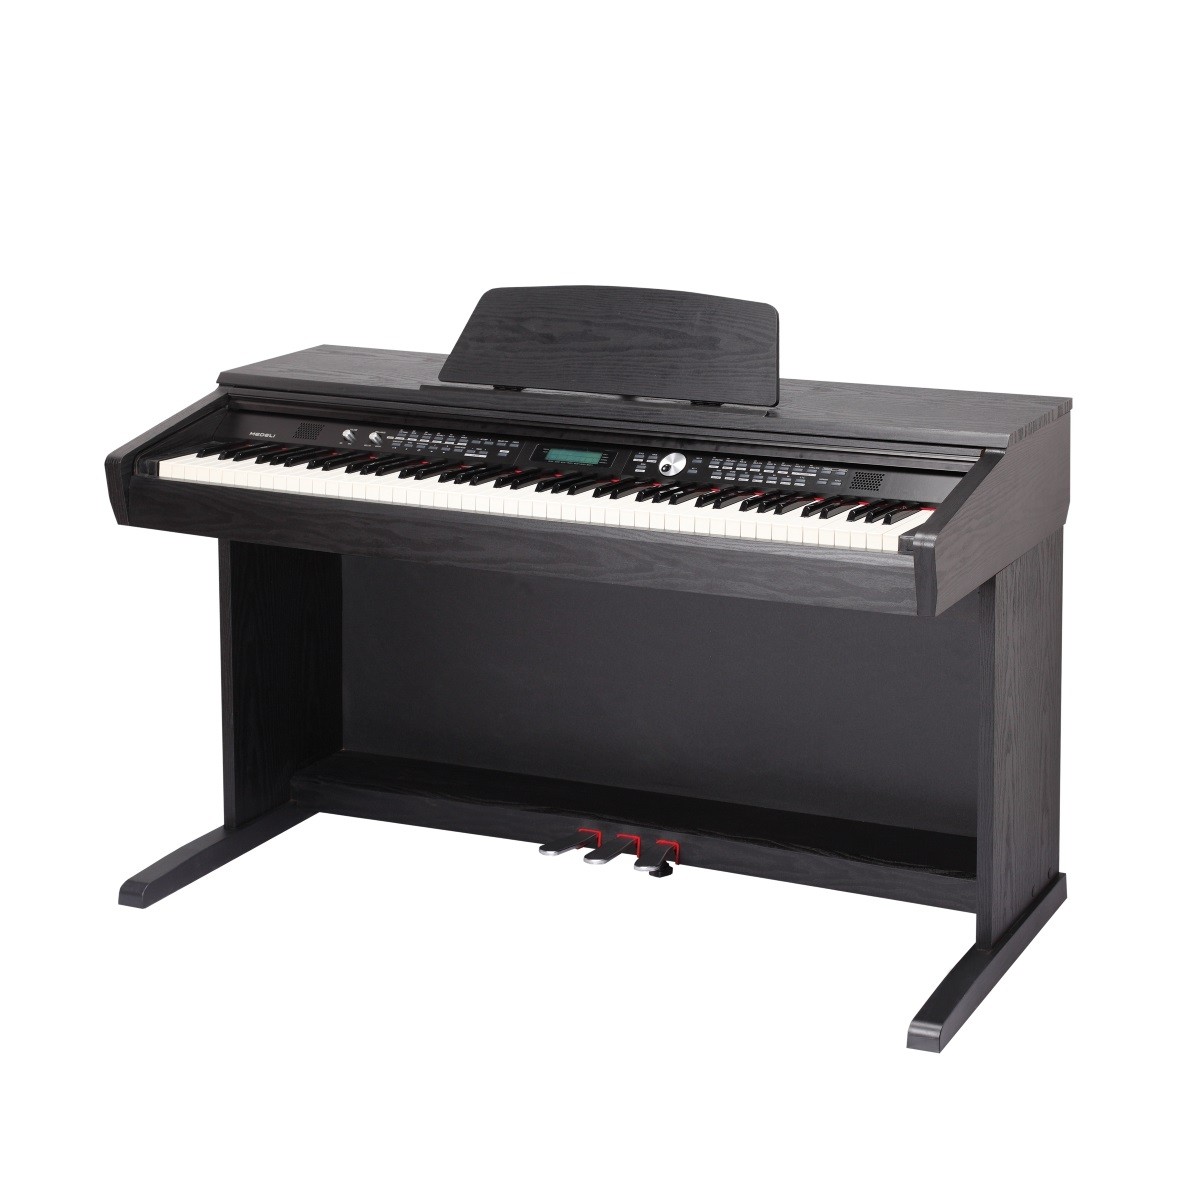 Medeli DP-330 Digital Piano with Cabinet and Piano Bench